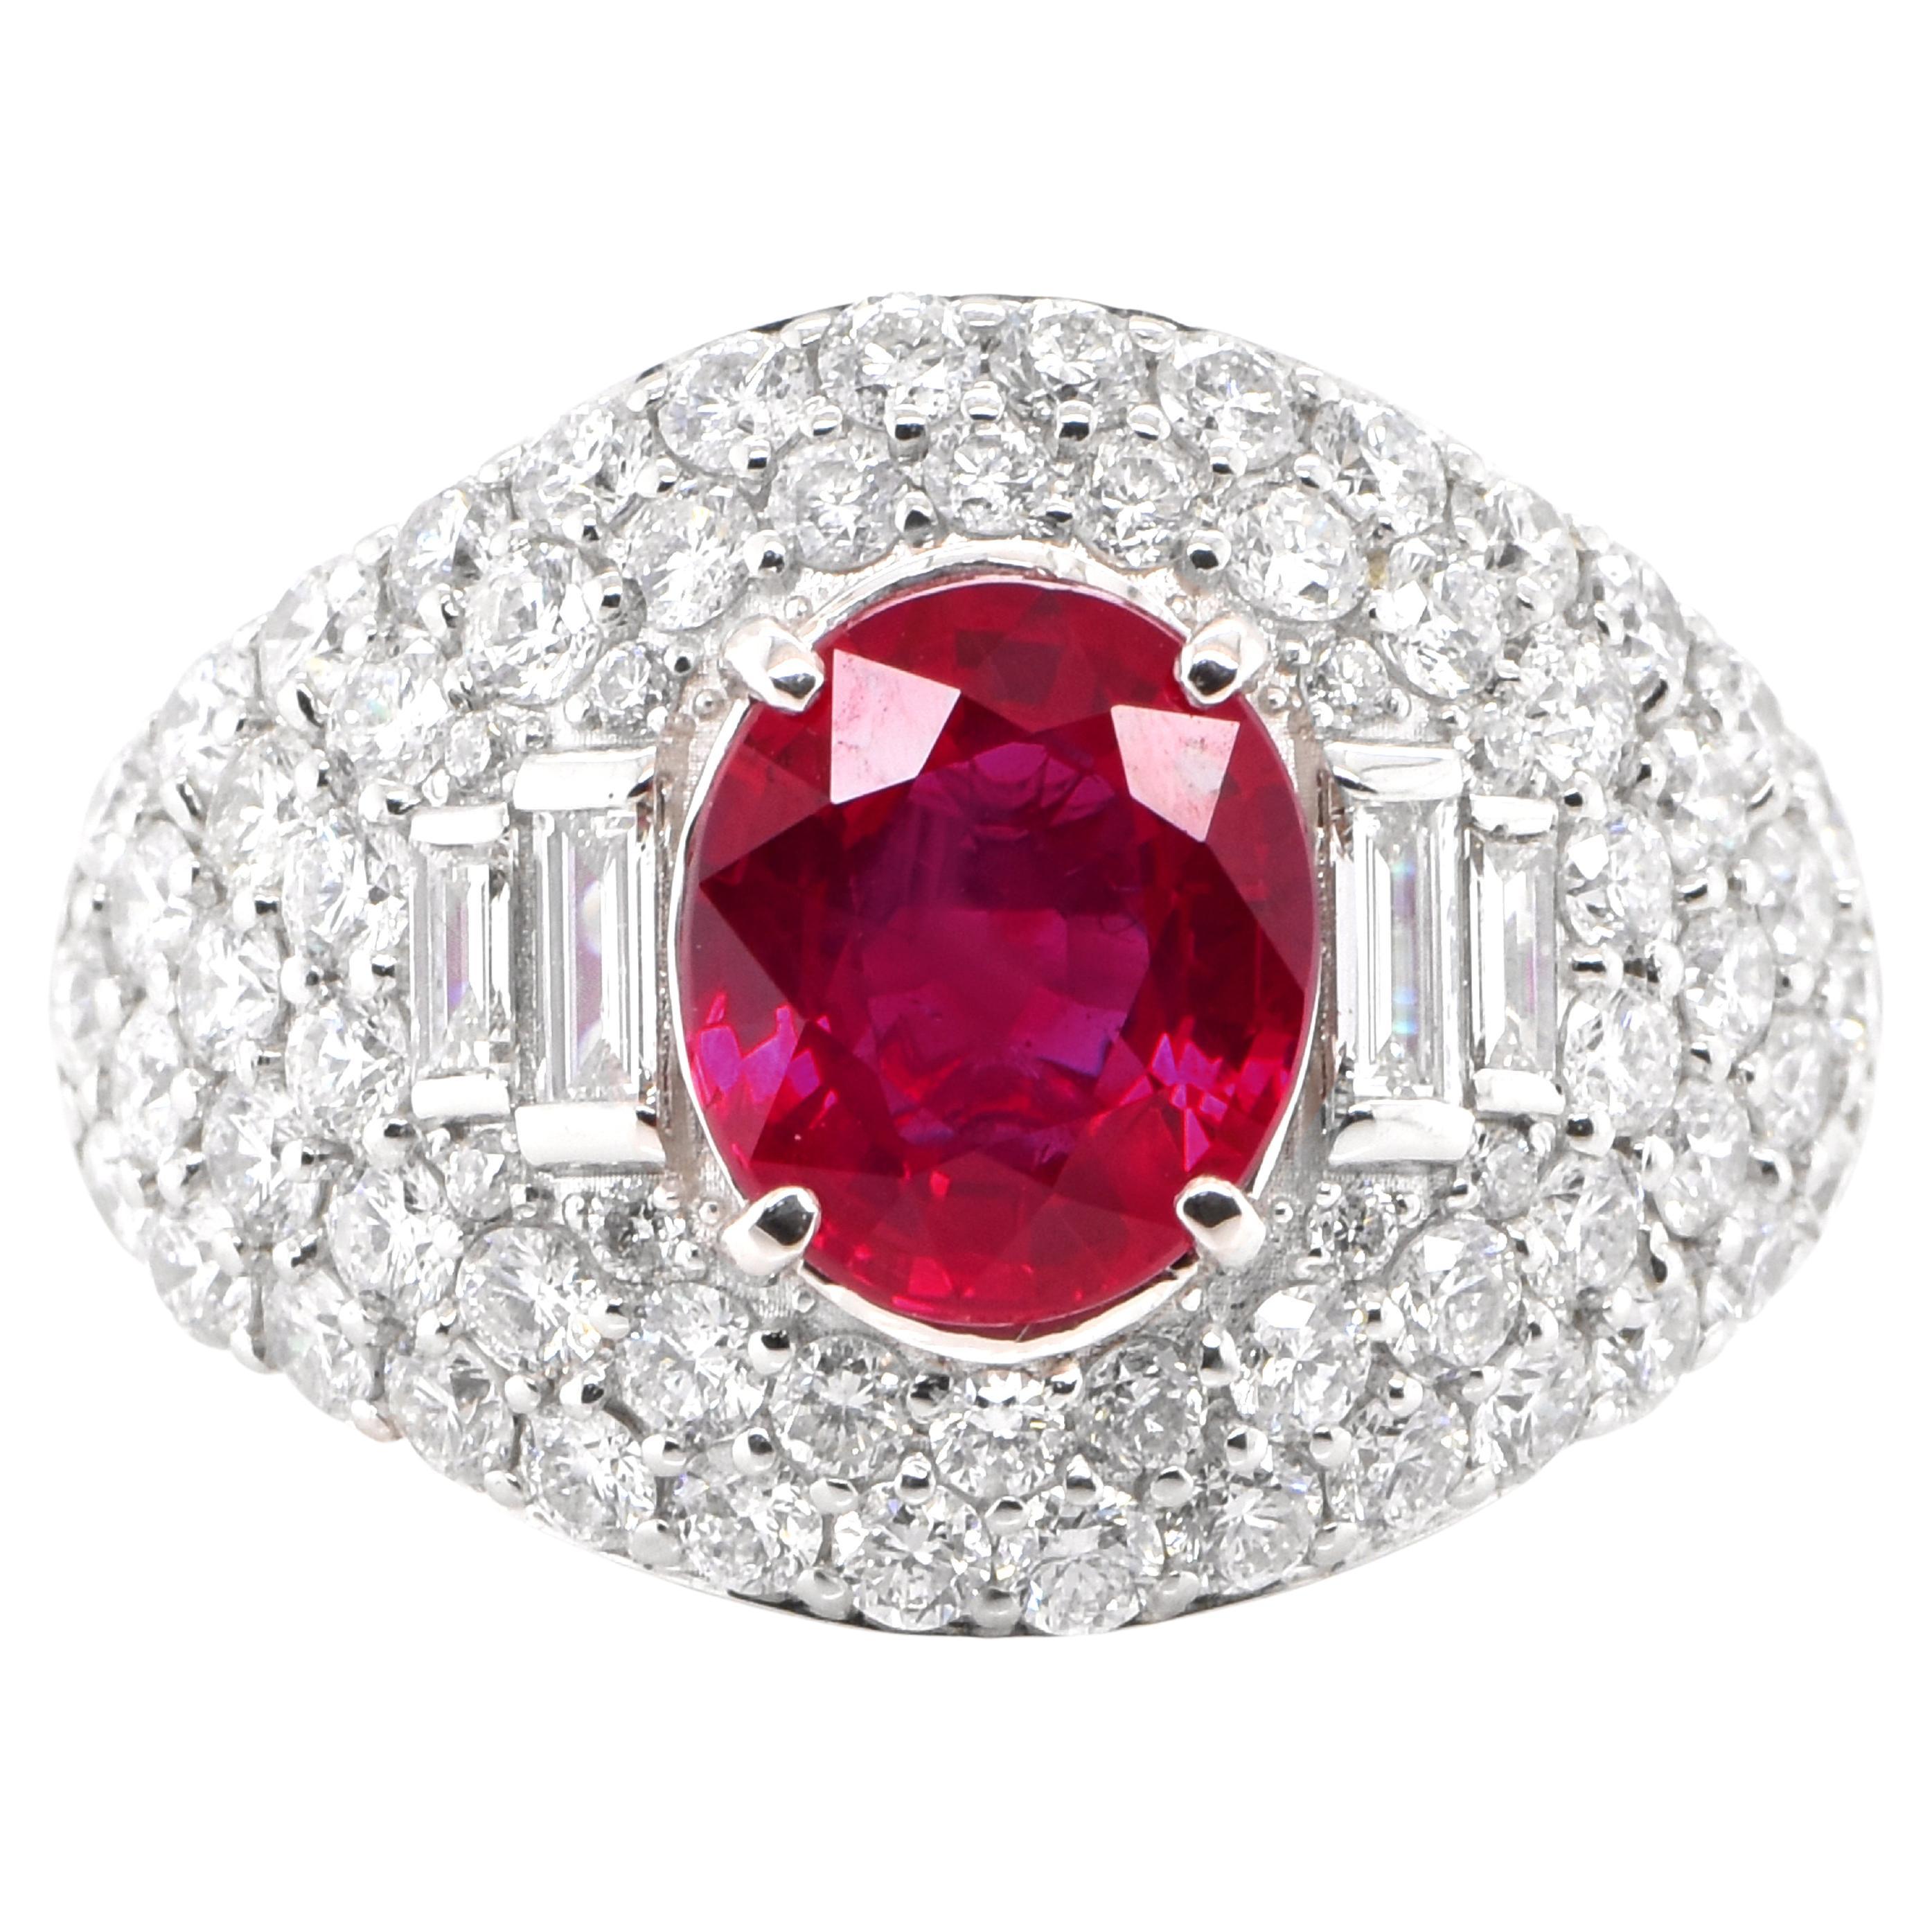 GIA Certified 2.15 Carat Natural Burmese Ruby and Diamond Ring Set in Platinum For Sale